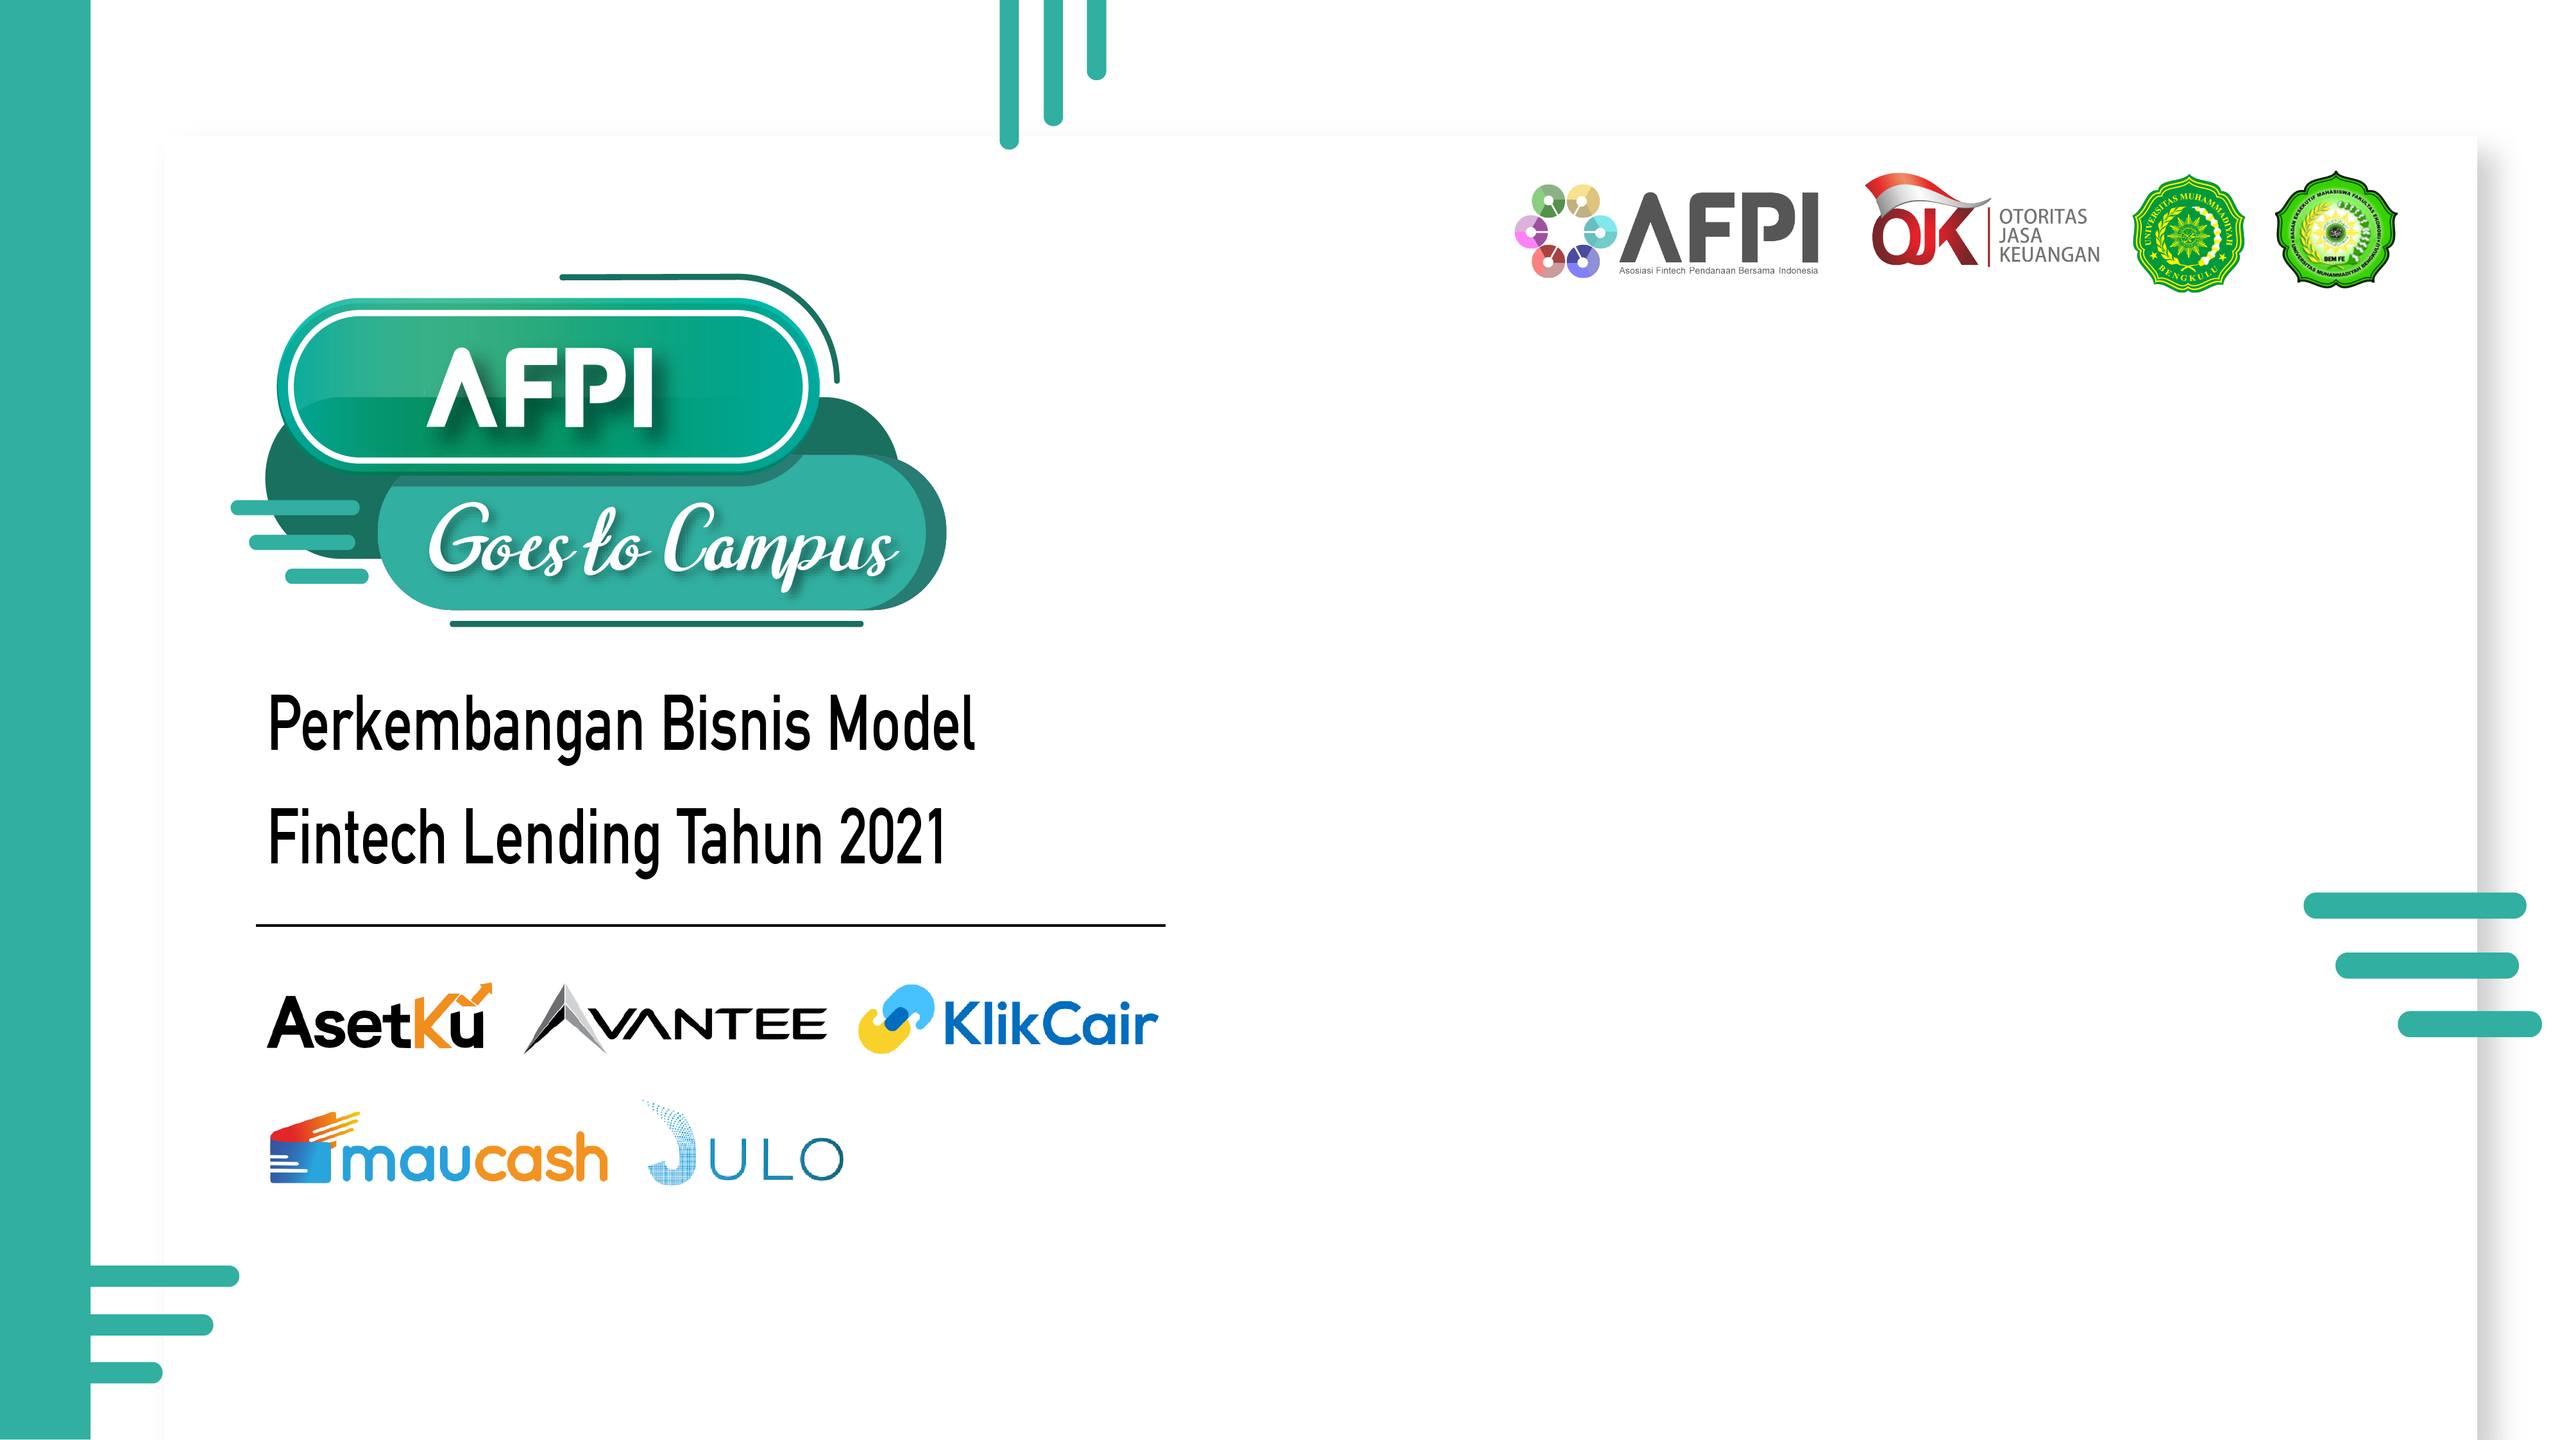 AFPI Goes to Campus